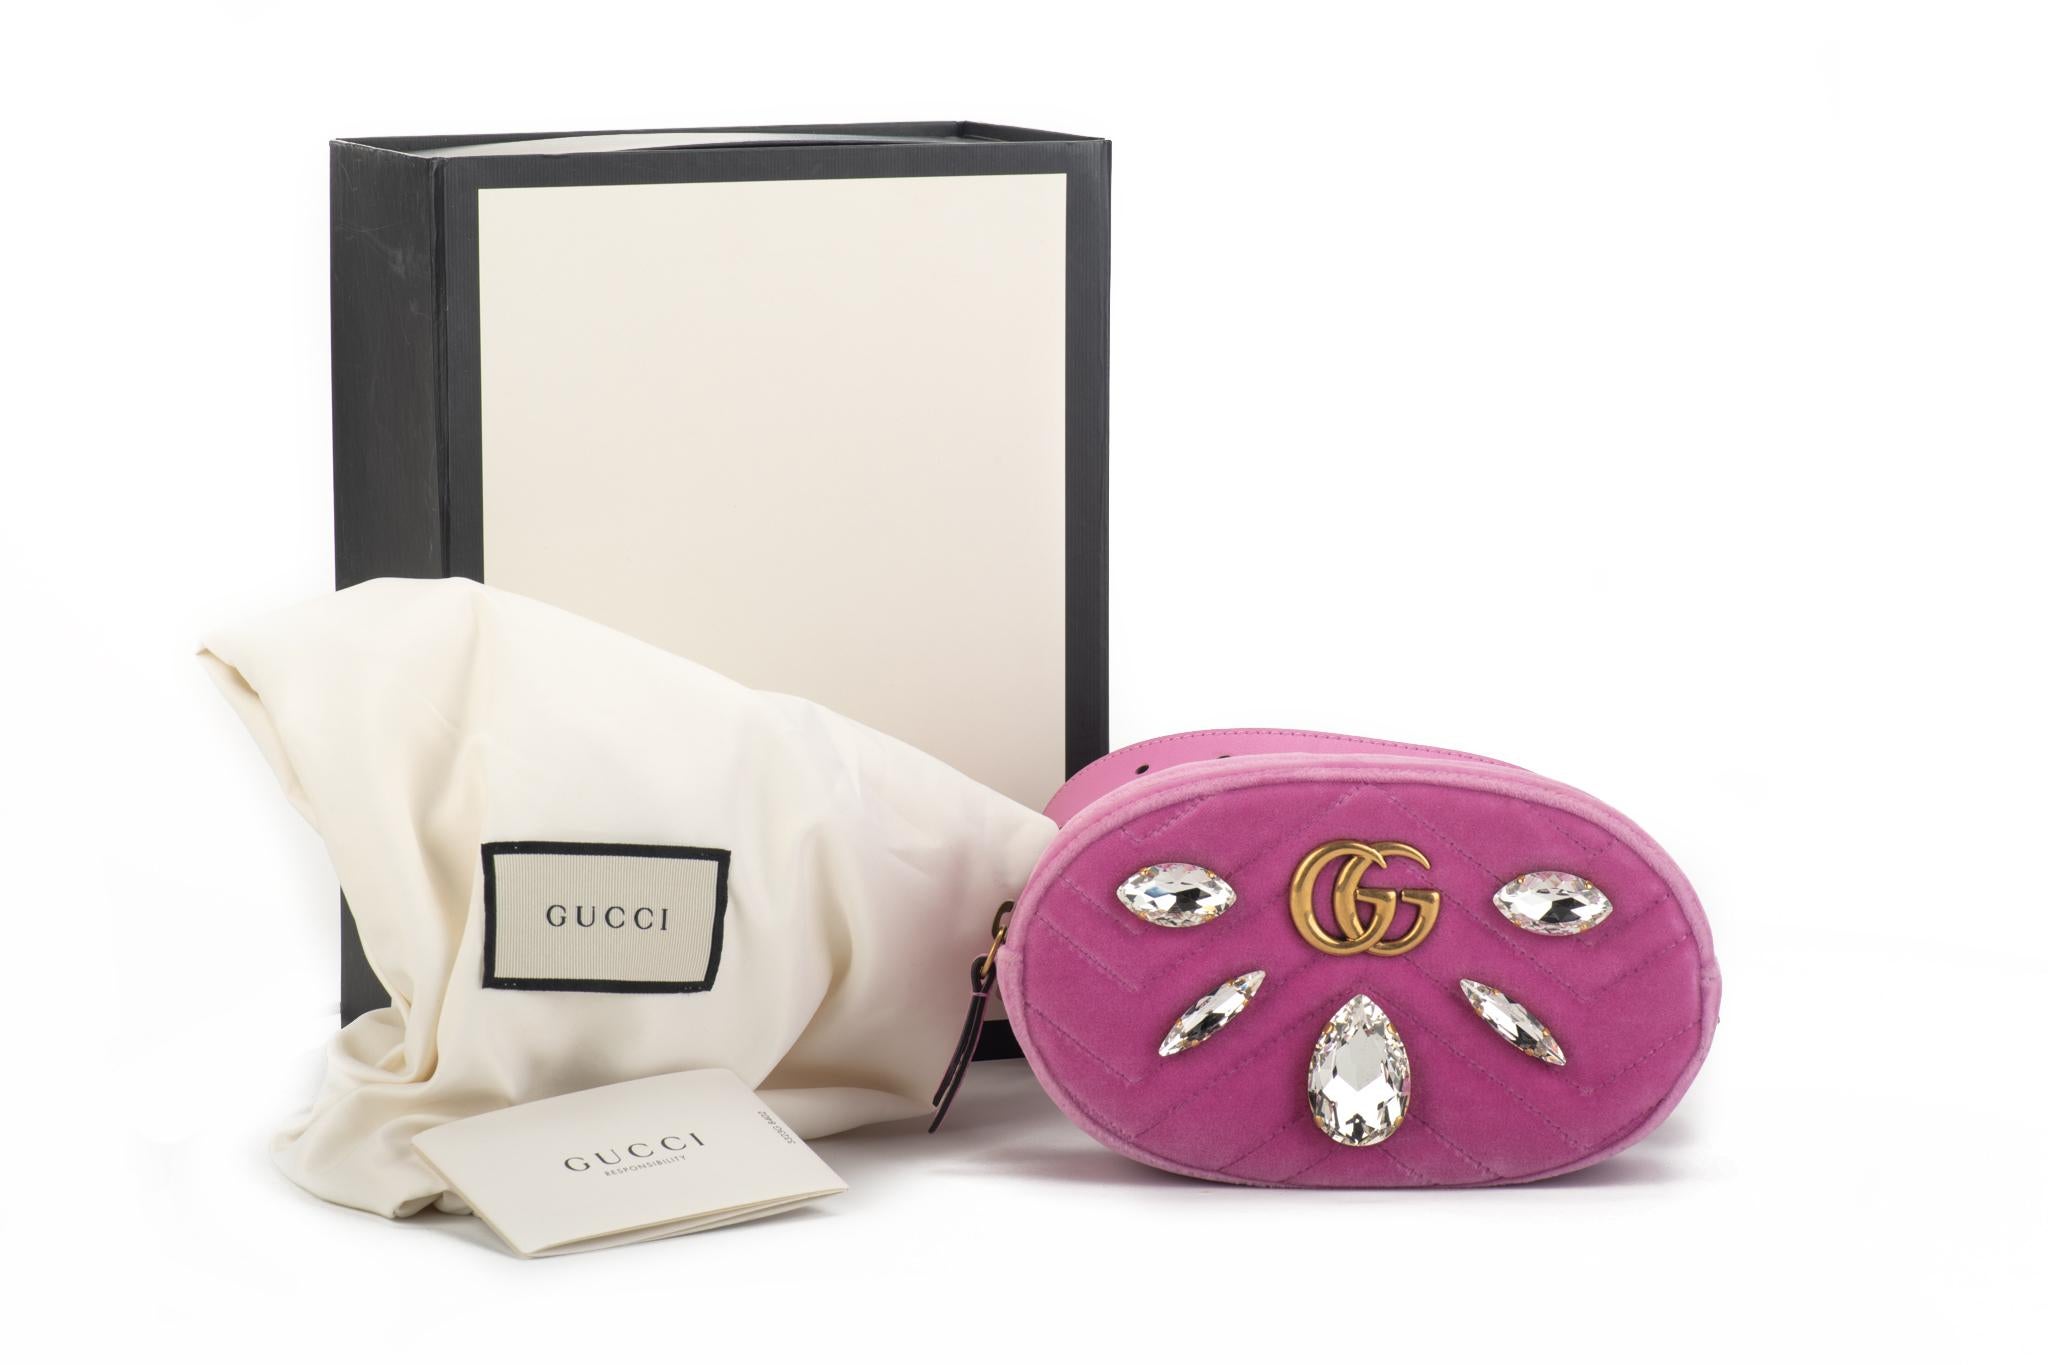 Brand new limited edition Gucci GG belt bag in pink velvet with clear rhinestones. The adjustable belt measures 40